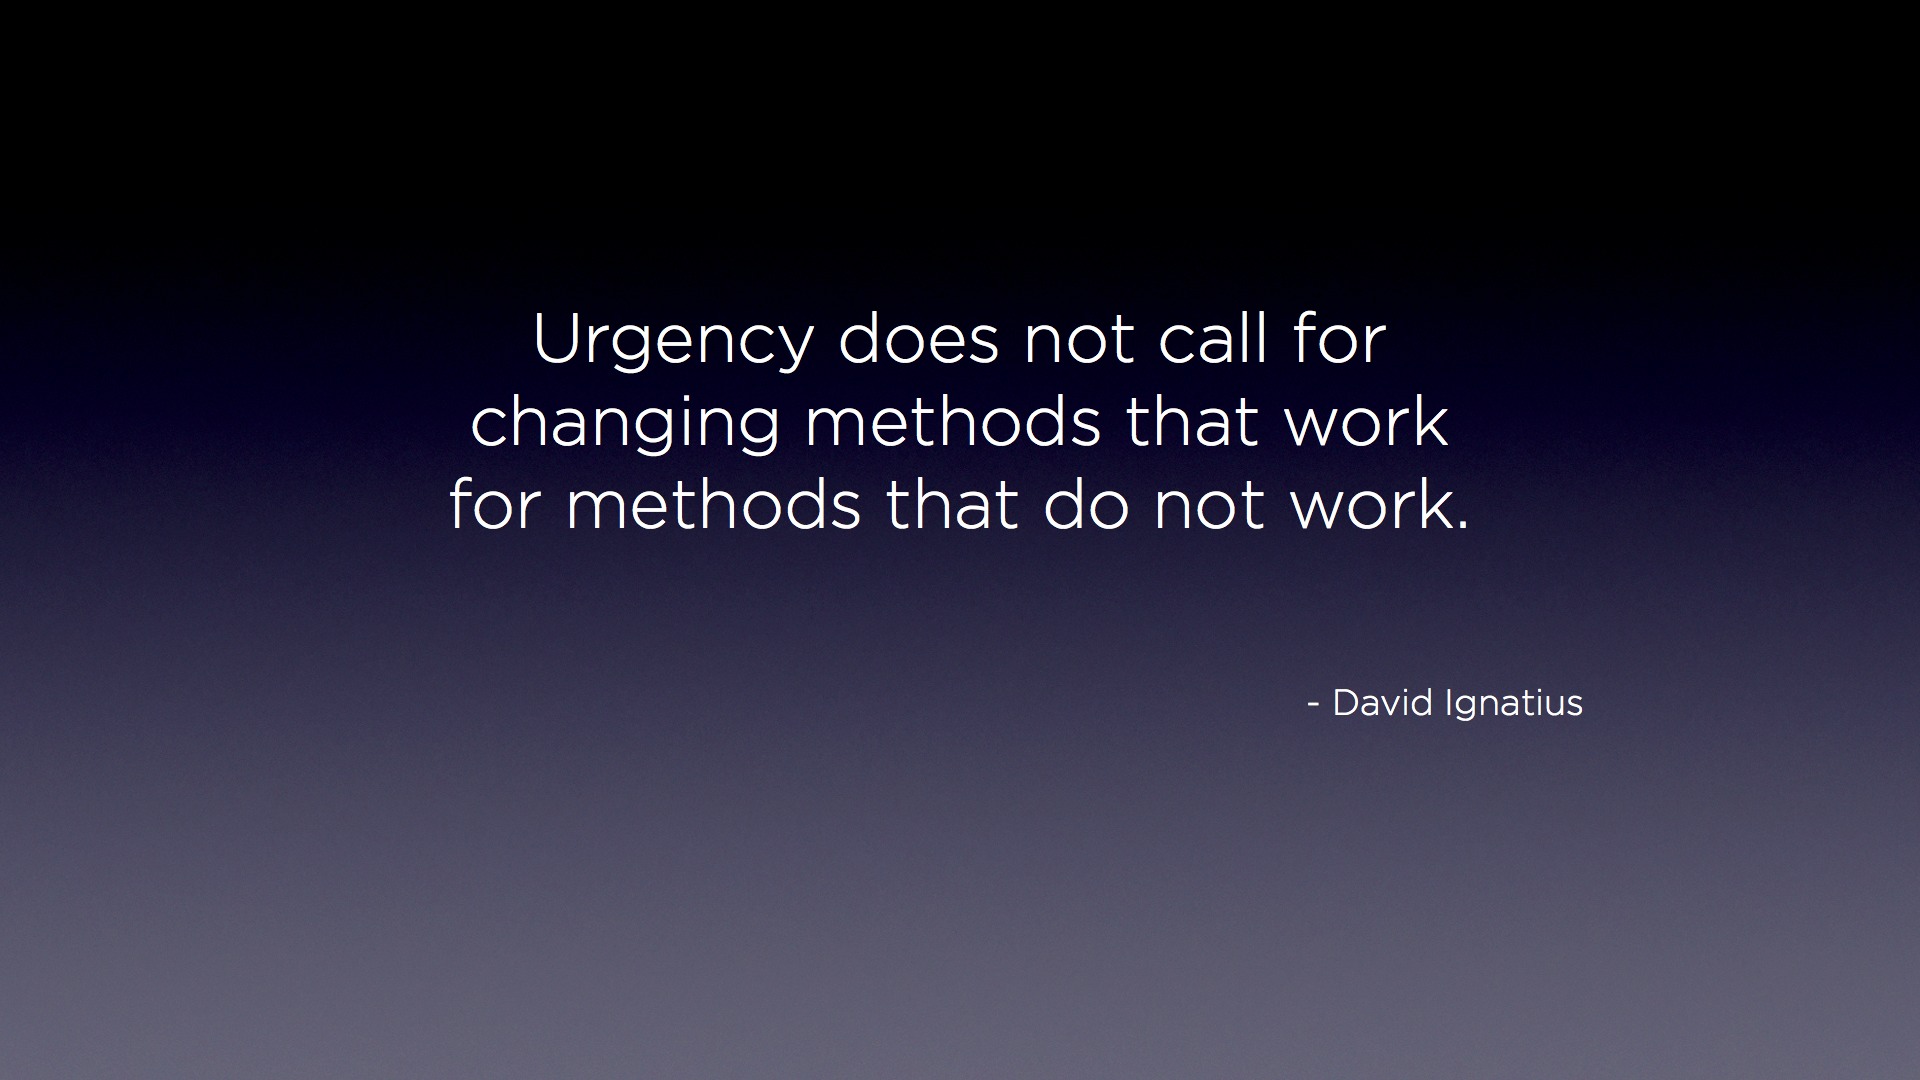 Urgency does not call for changing methods that work for methods that do not work. - David Ignatius